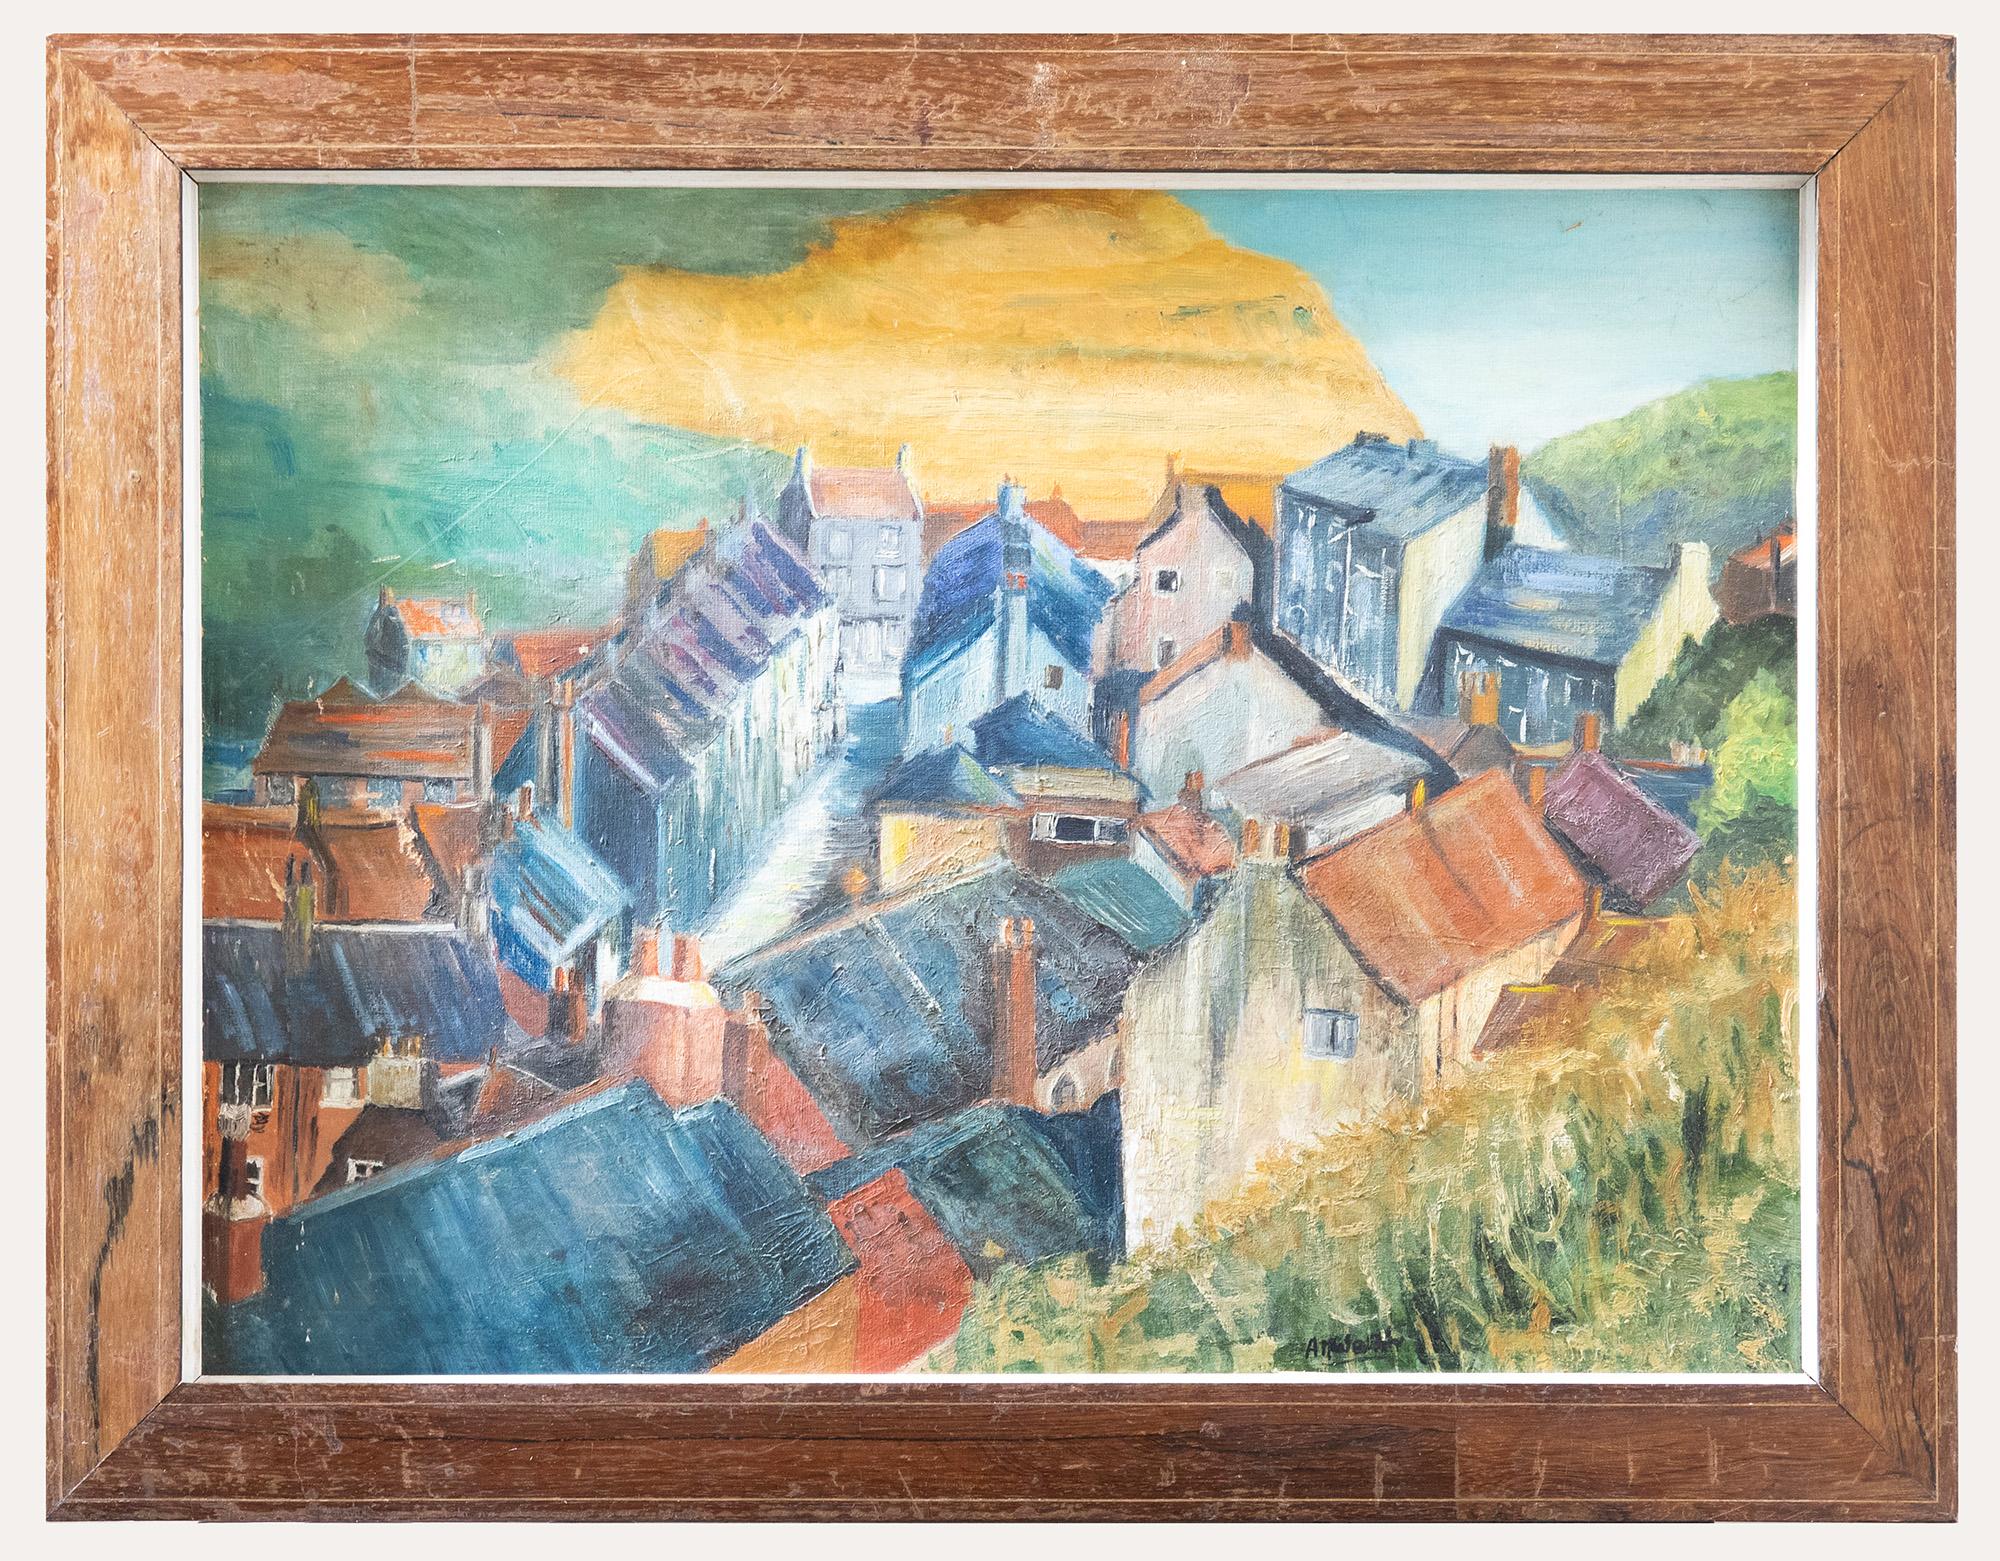 Unknown Figurative Painting - Framed 20th Century Oil - Village by the Sea